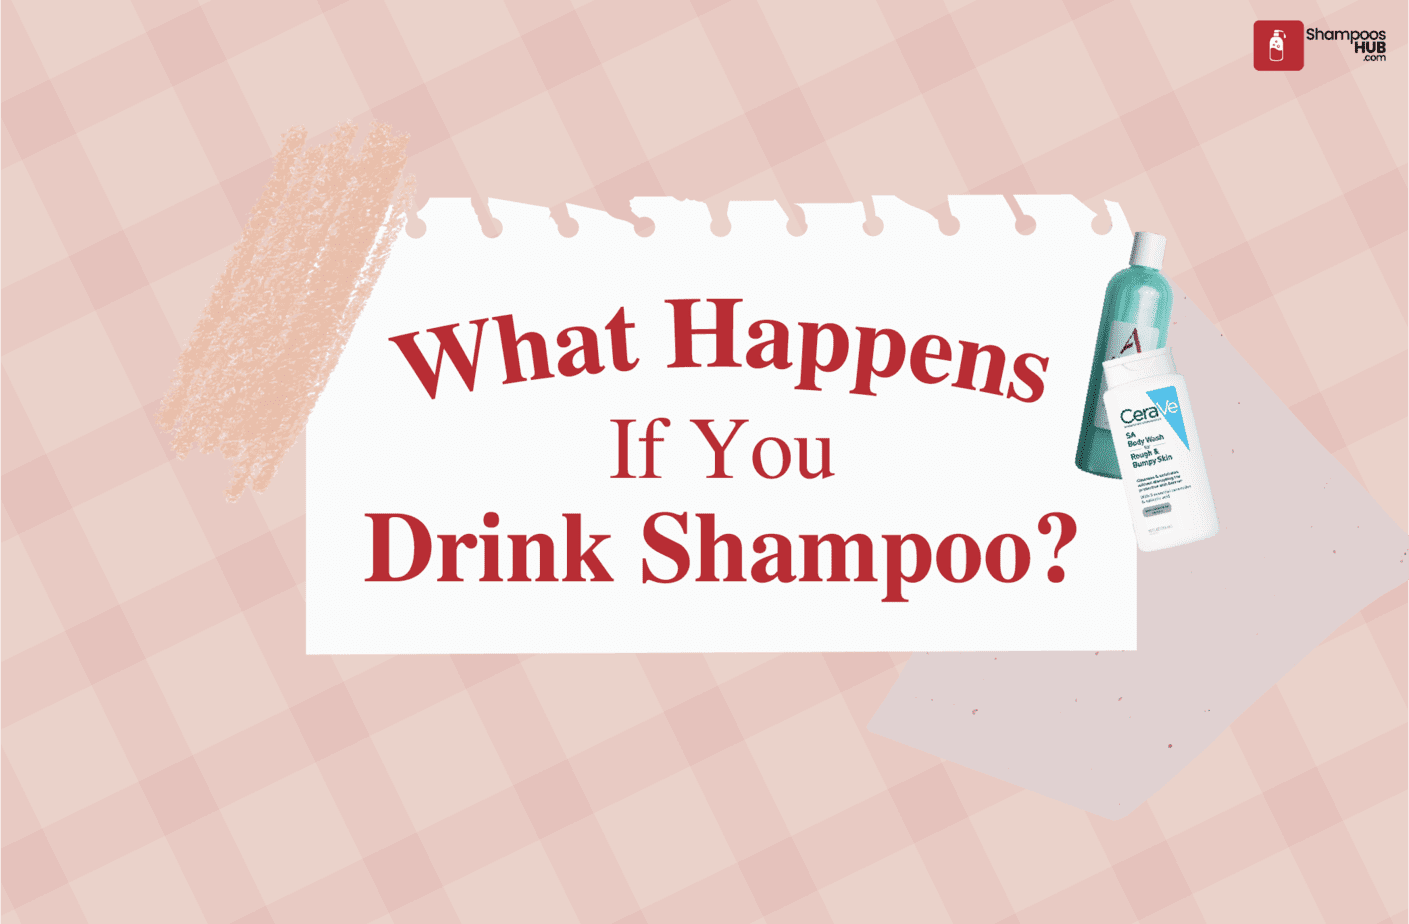 What Happens If You Drink Shampoo?